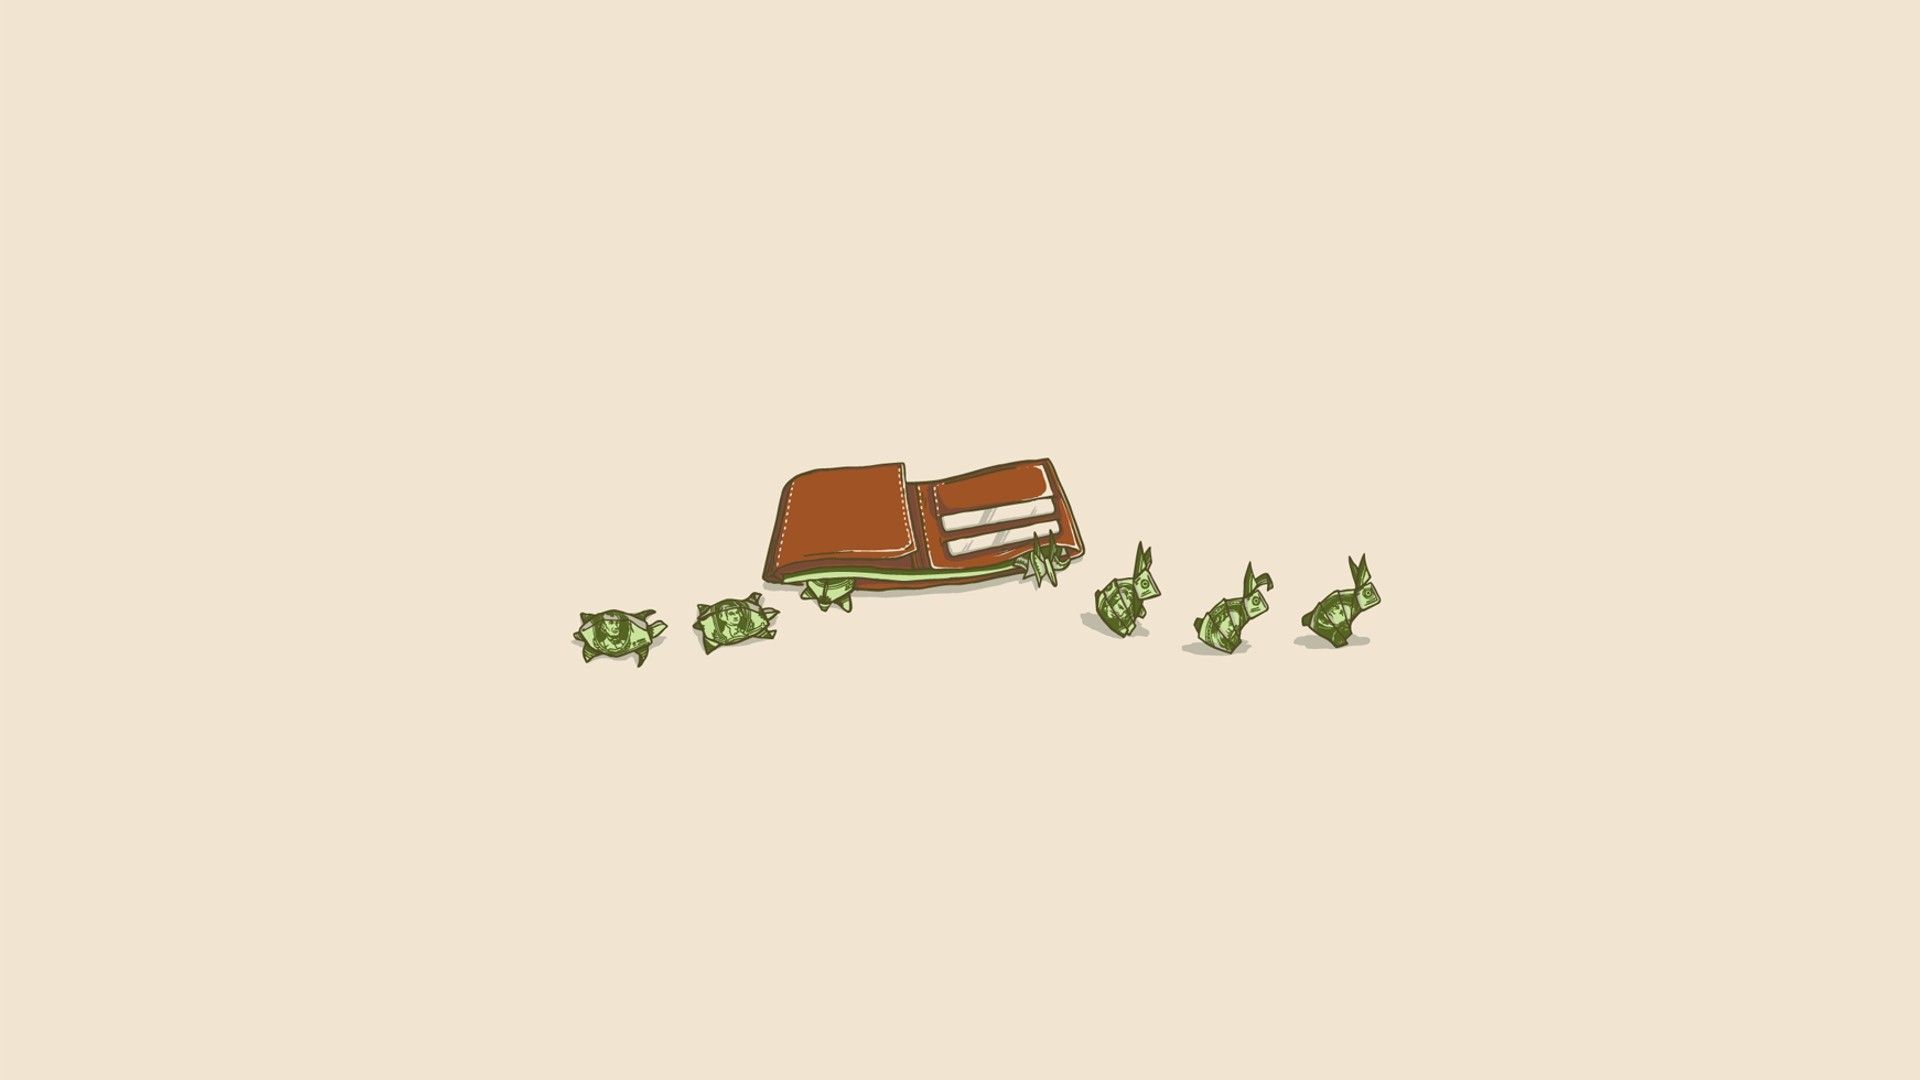 Minimalistic illustration of a wallet with a dollar sign on it - Money